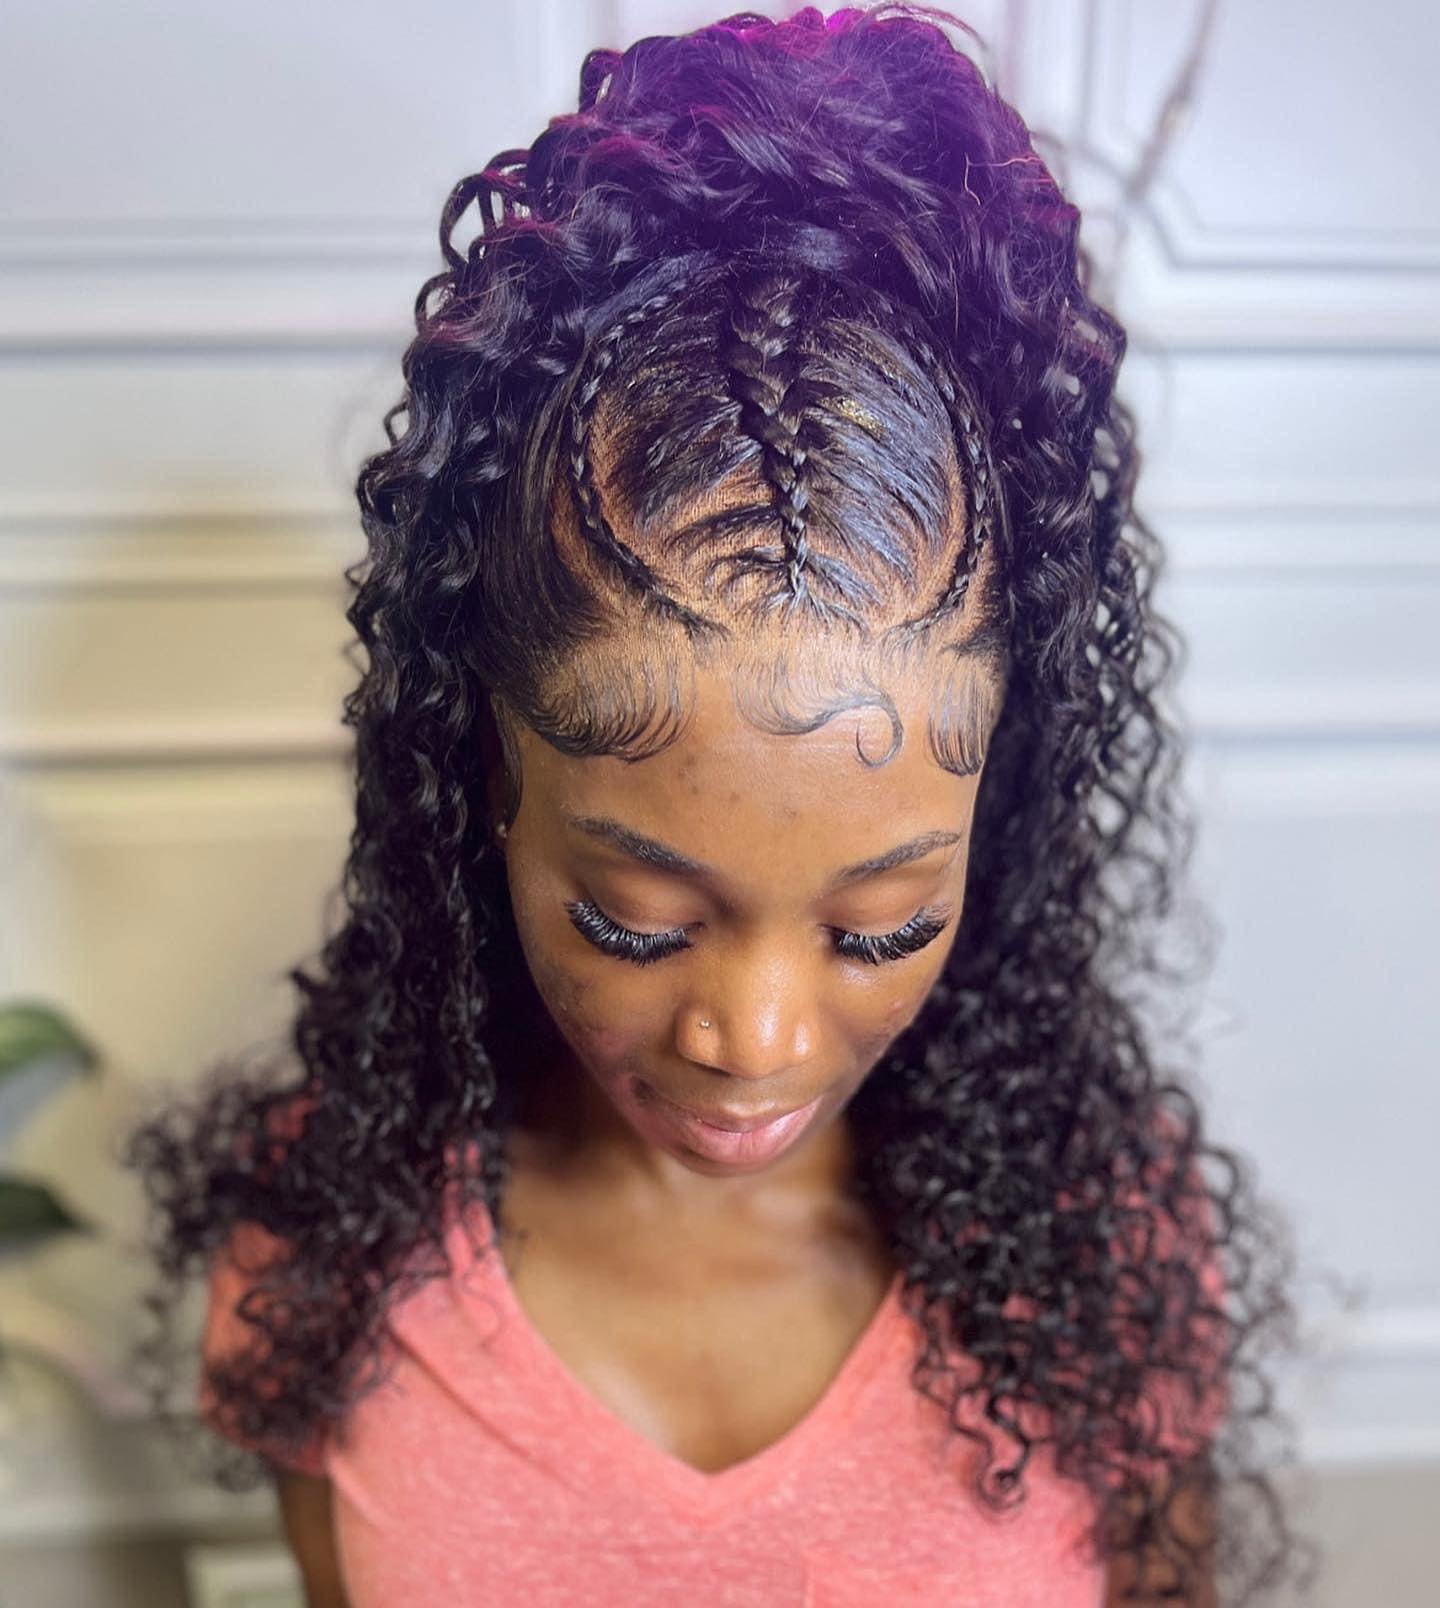 Updo Hairstyle for Black women 7 Black hair updo styles pictures | Black updo hairstyles with curls | black woman braids Updo Hairstyles for Black Women